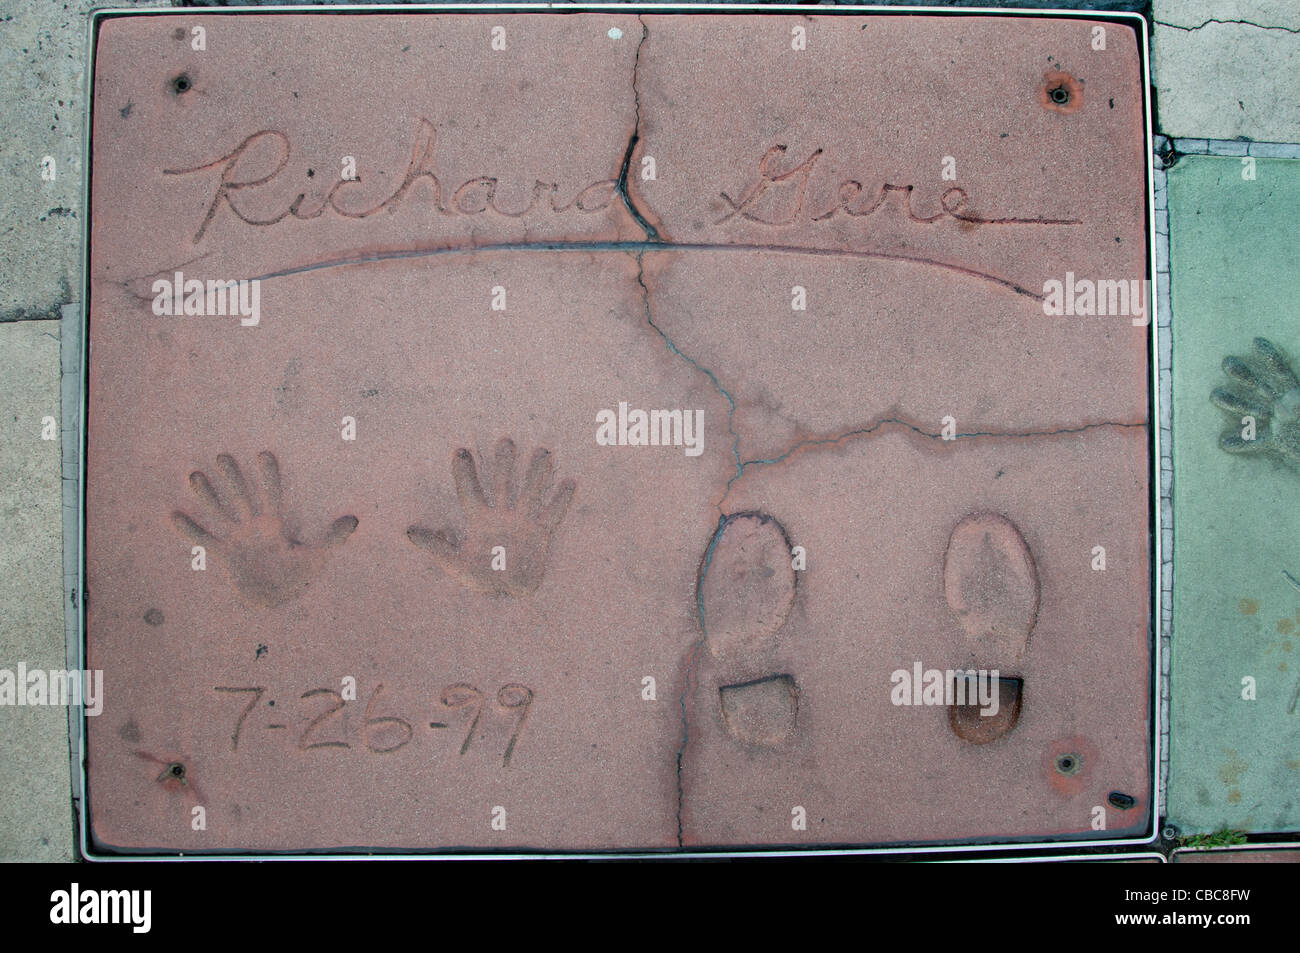 Richard Tiffany Gere Hand Foot Prints Paving Chinese Theater in Hollywood Boulevard Los Angeles Stock Photo